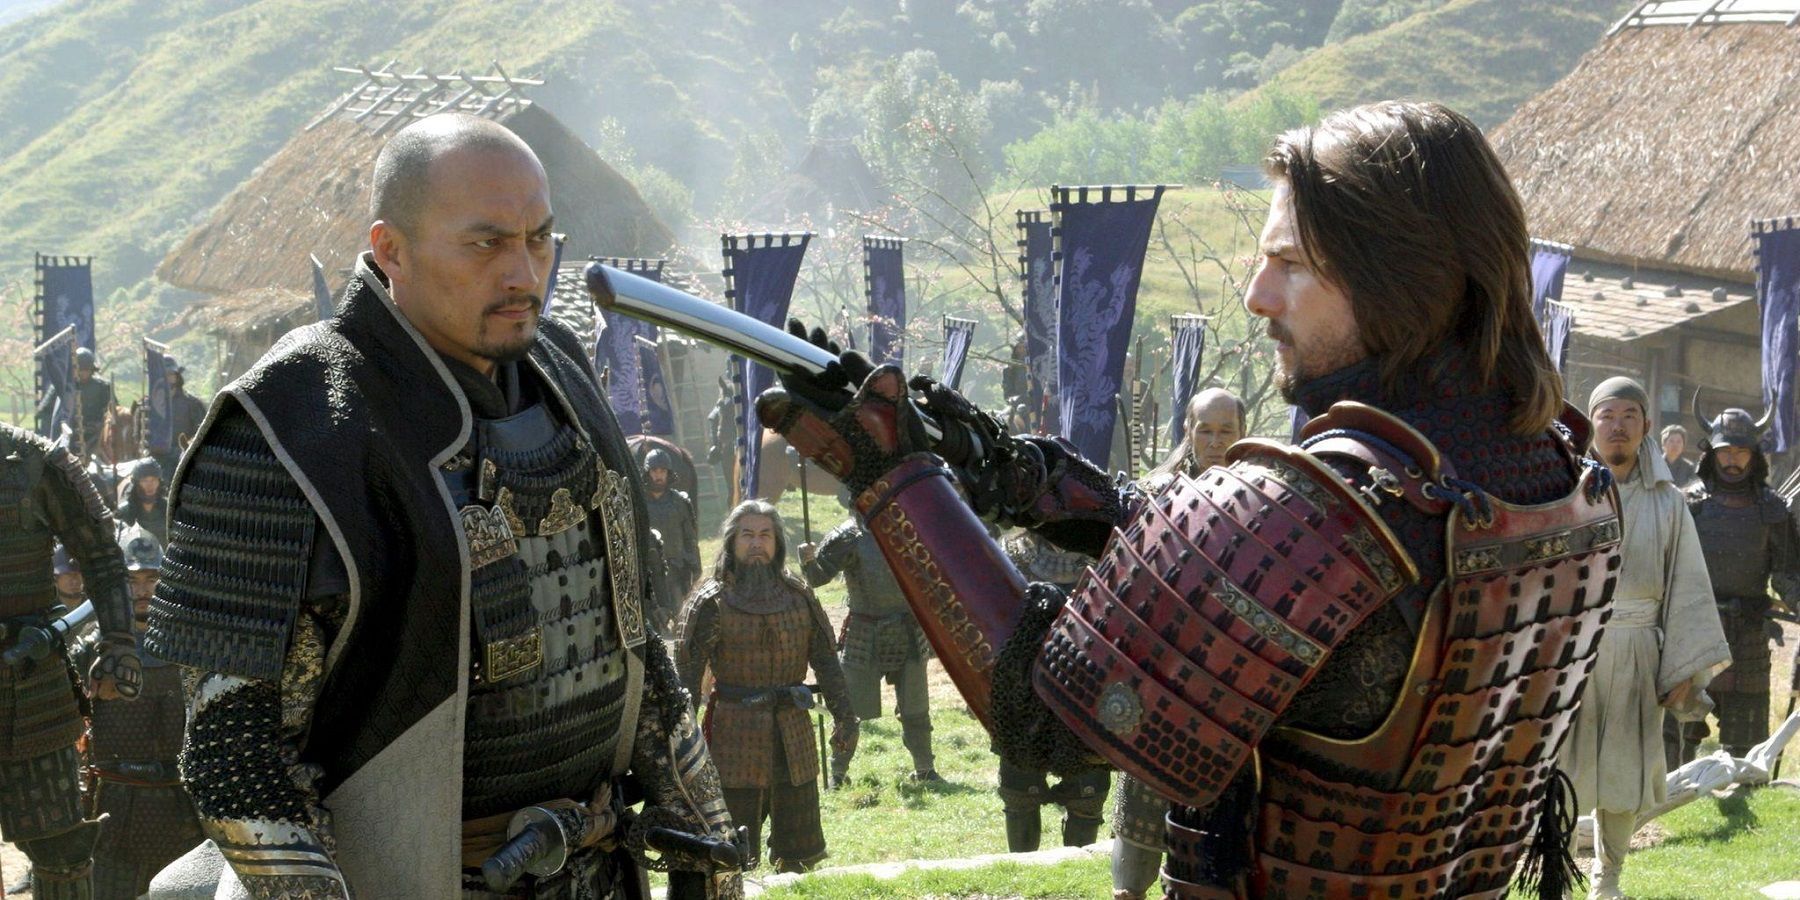 Ken Watanabe in The Last Samurai faces down Tom Cruises' character